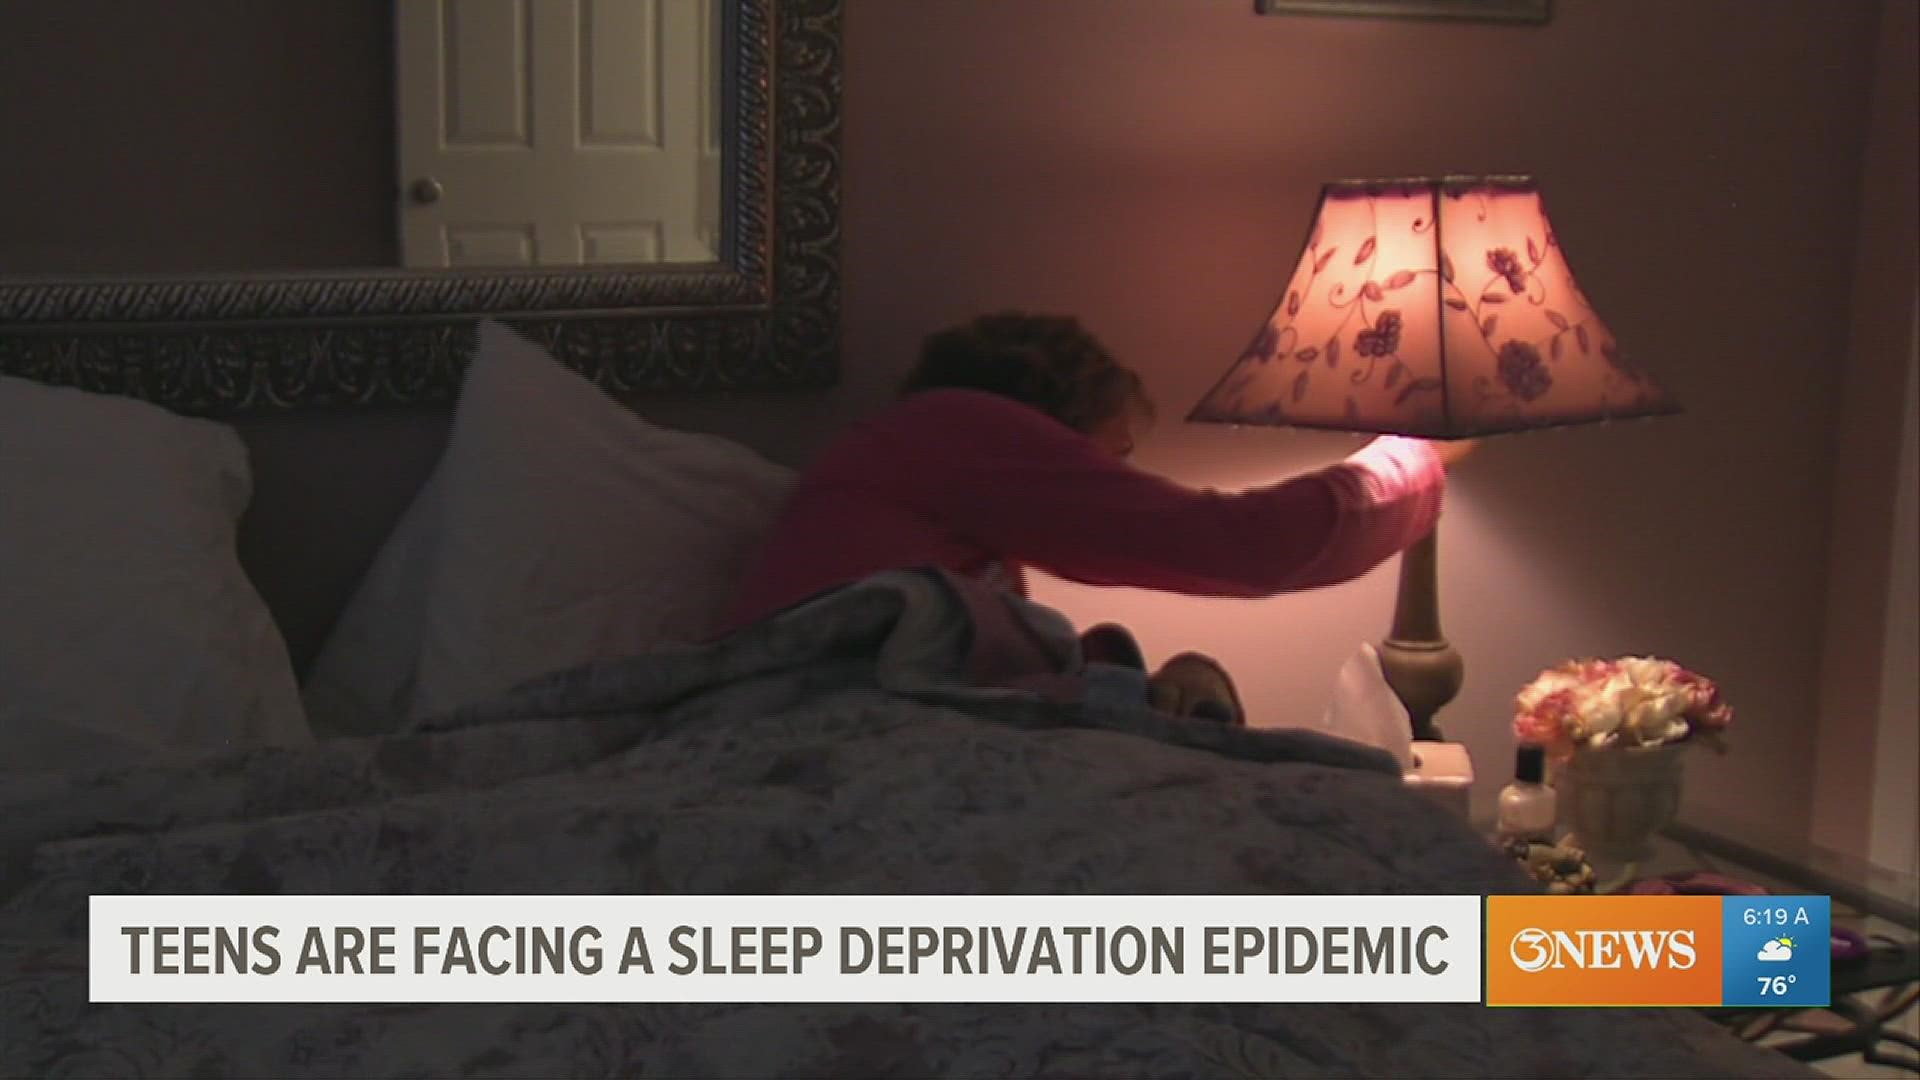 Dr. Surani said it is important for teens to get at least 8 hours of sleep every night.